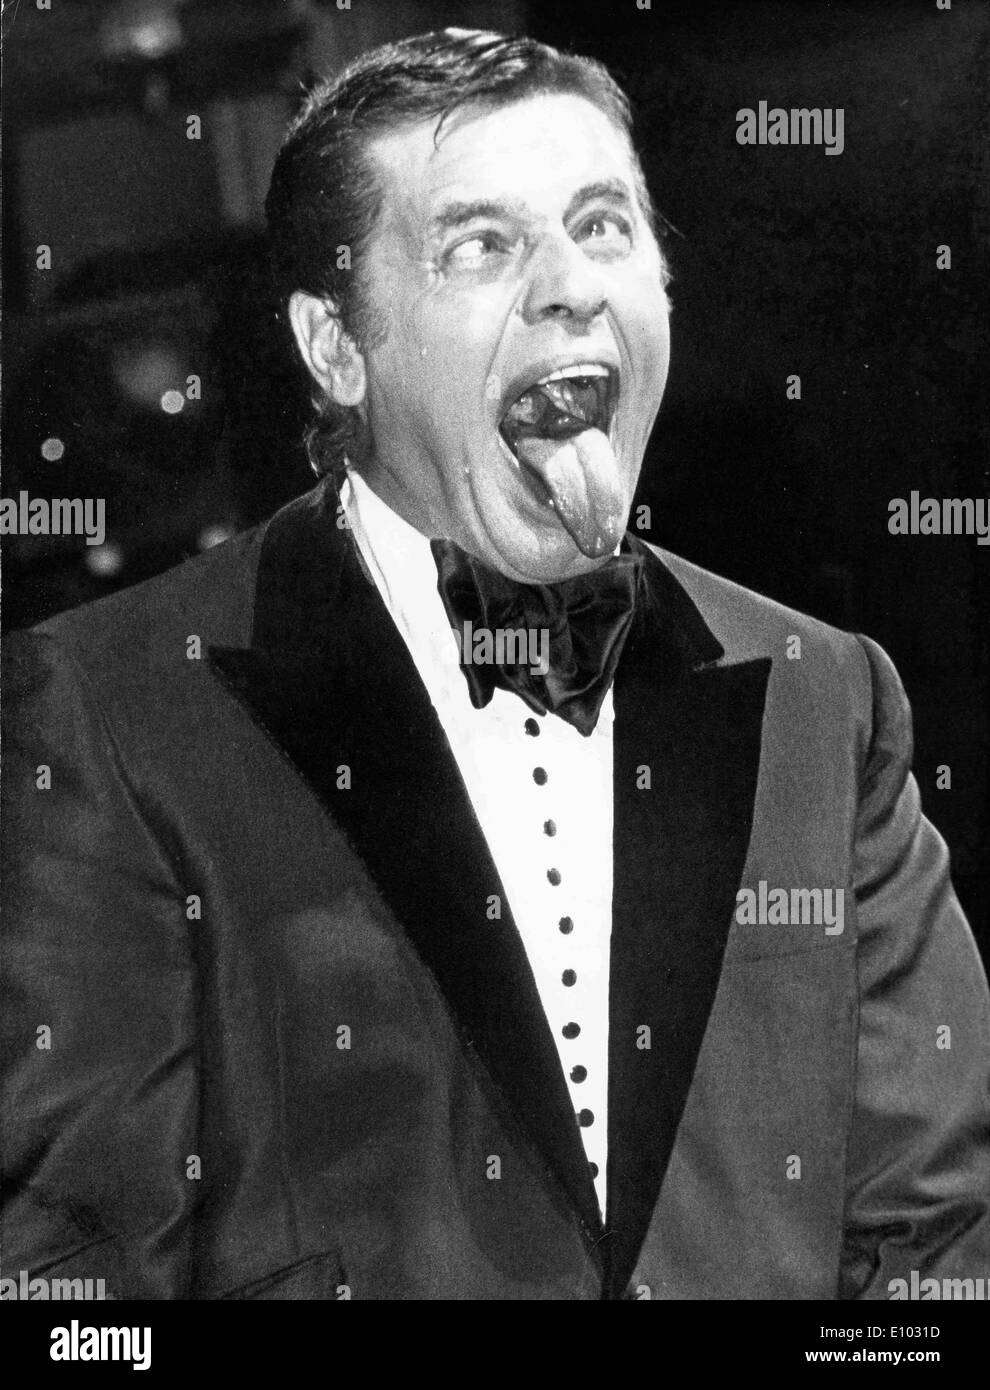 Comedian Jerry Lewis performs comedy in show Stock Photo